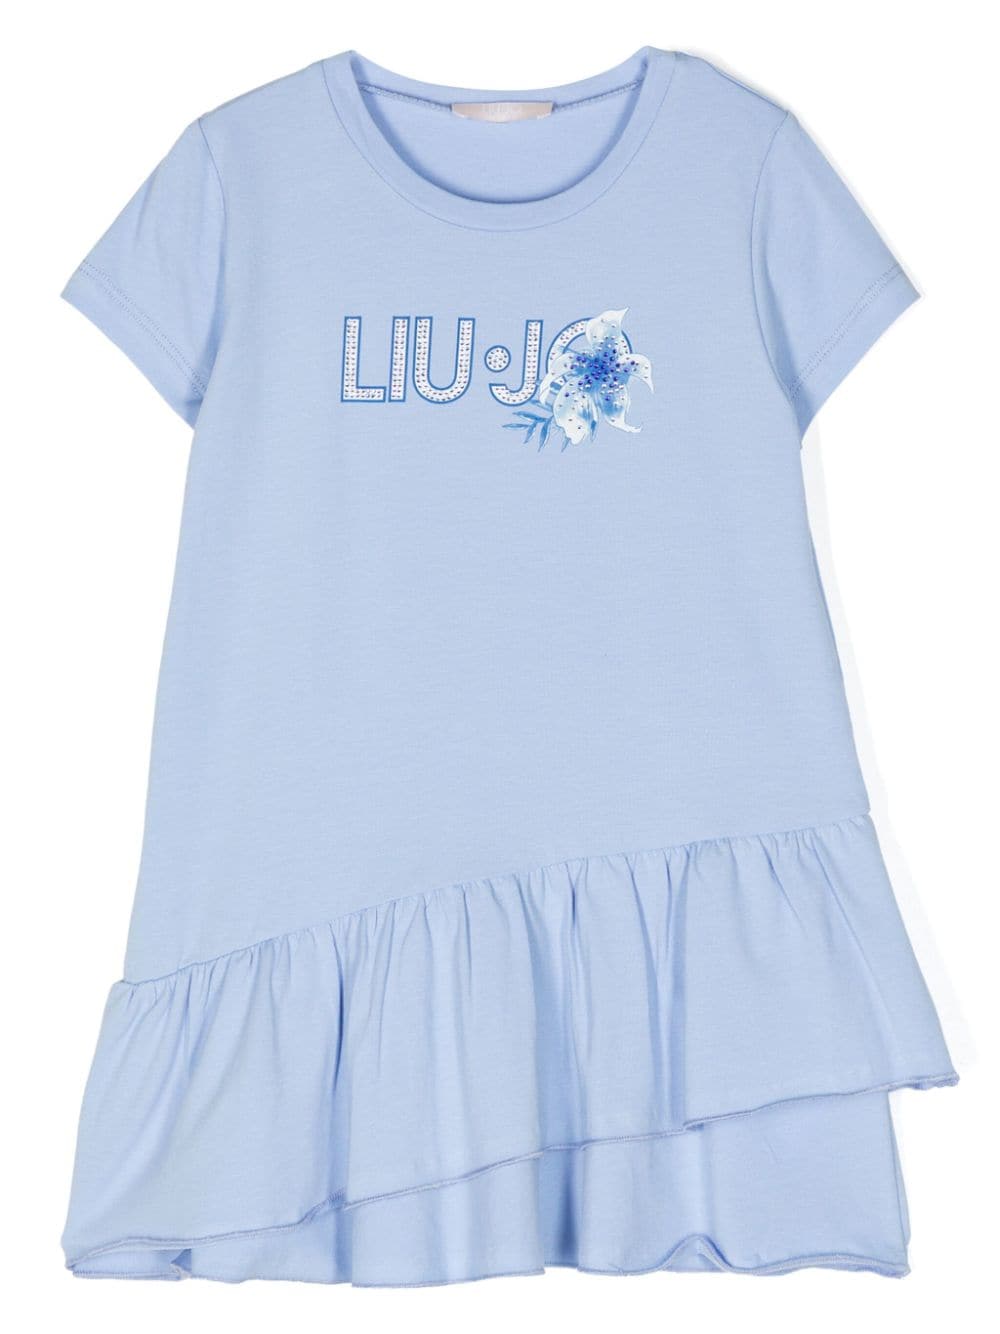 Blue dress for girls with logo